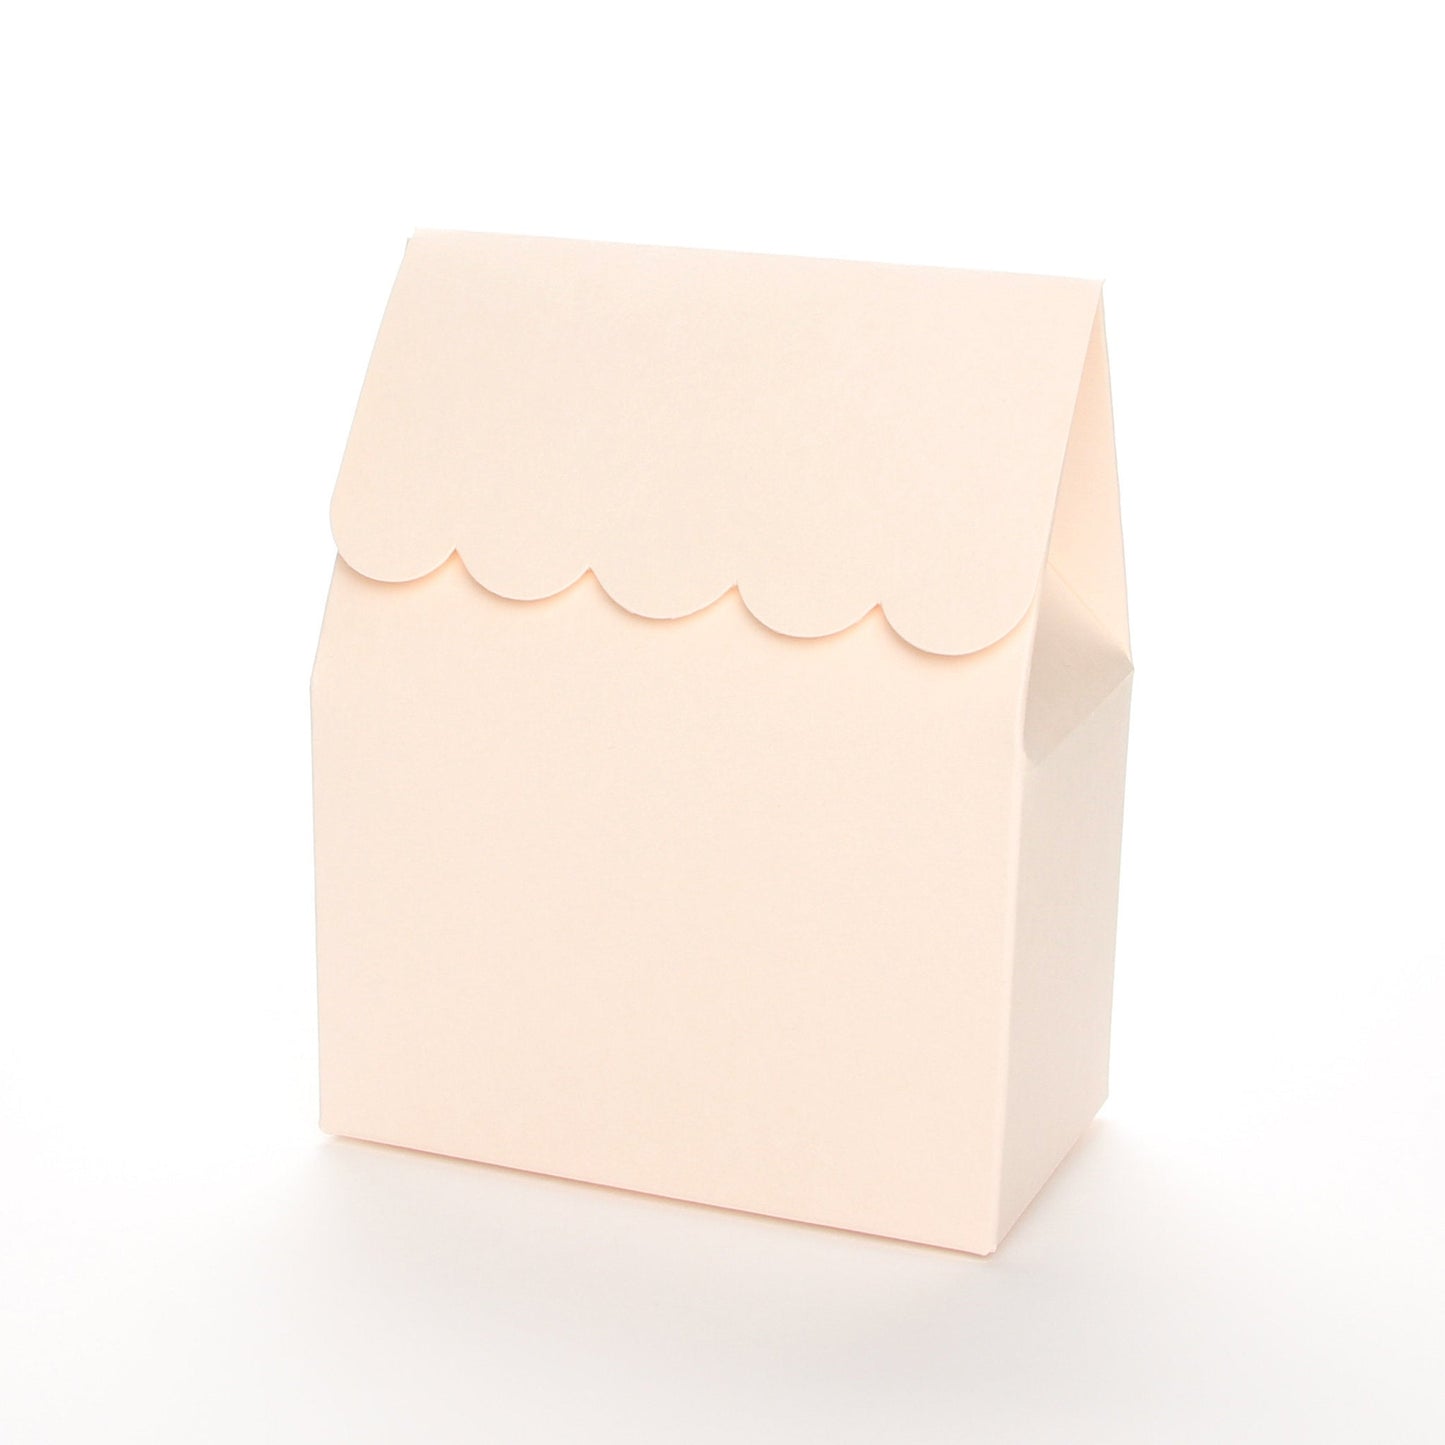 Blush favor box by Lux Party with a scalloped edge on a white background.